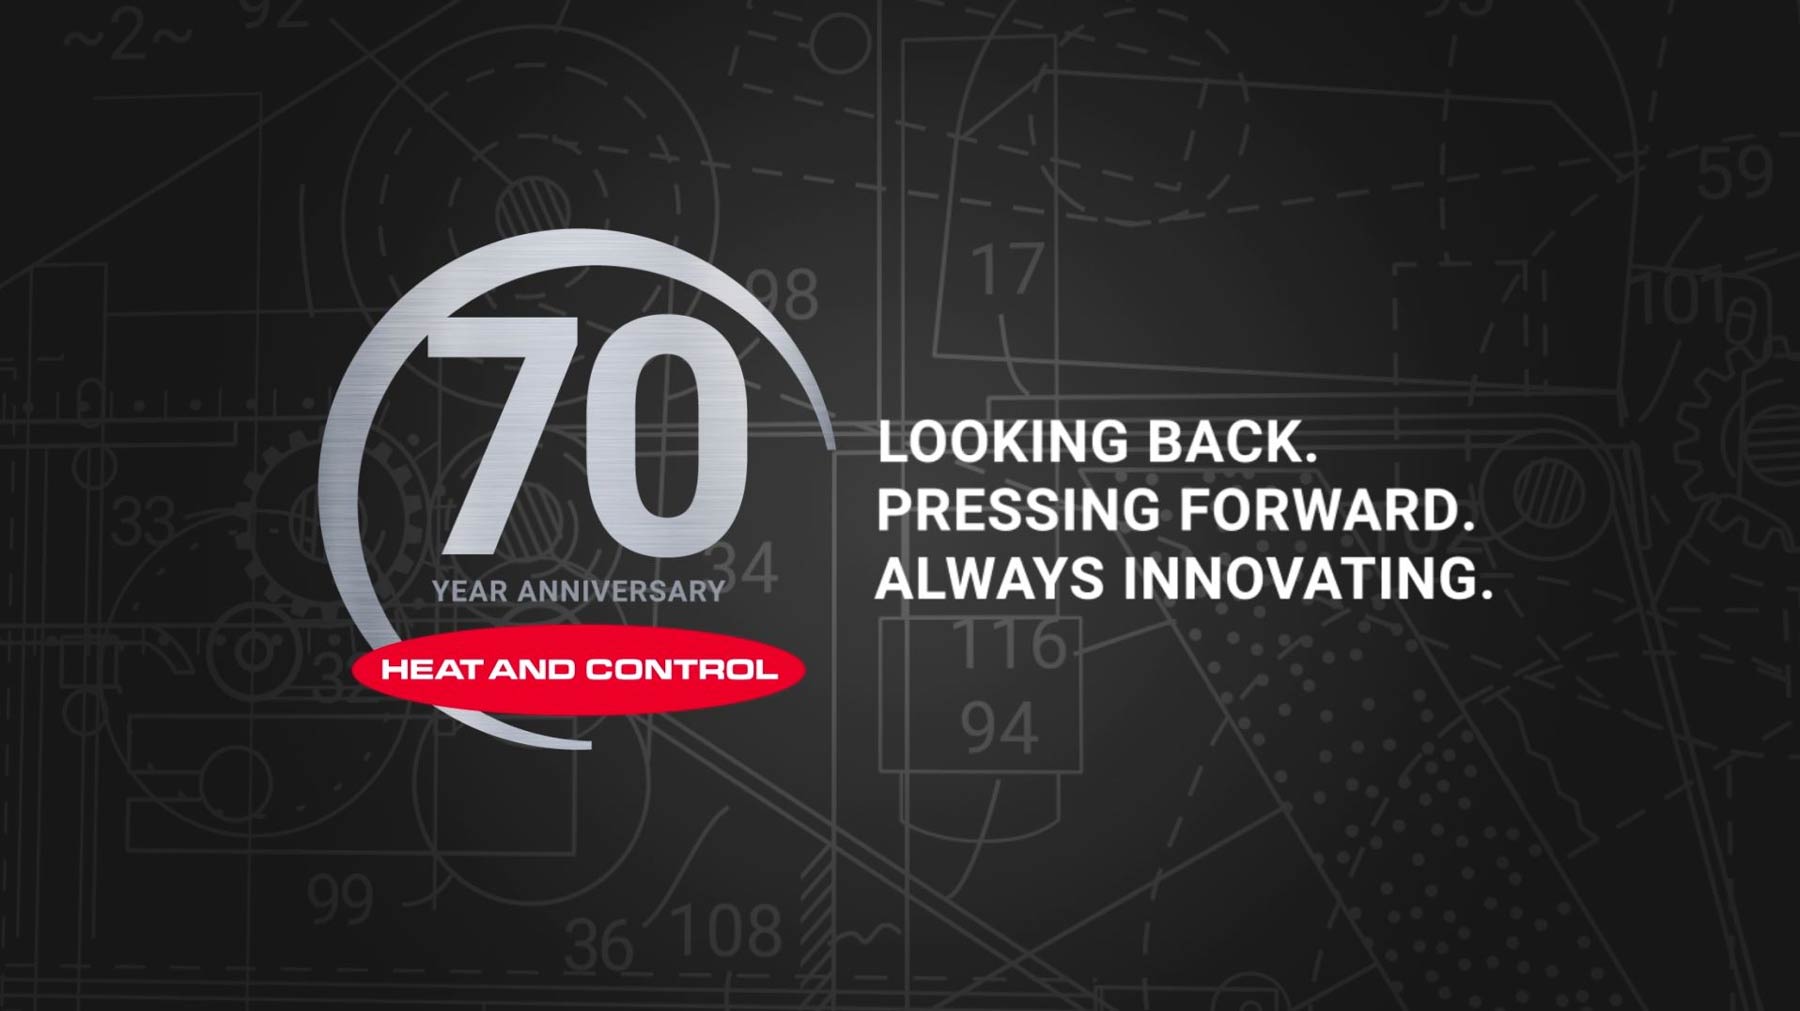 Heat and Control 70 Year Anniversary Video